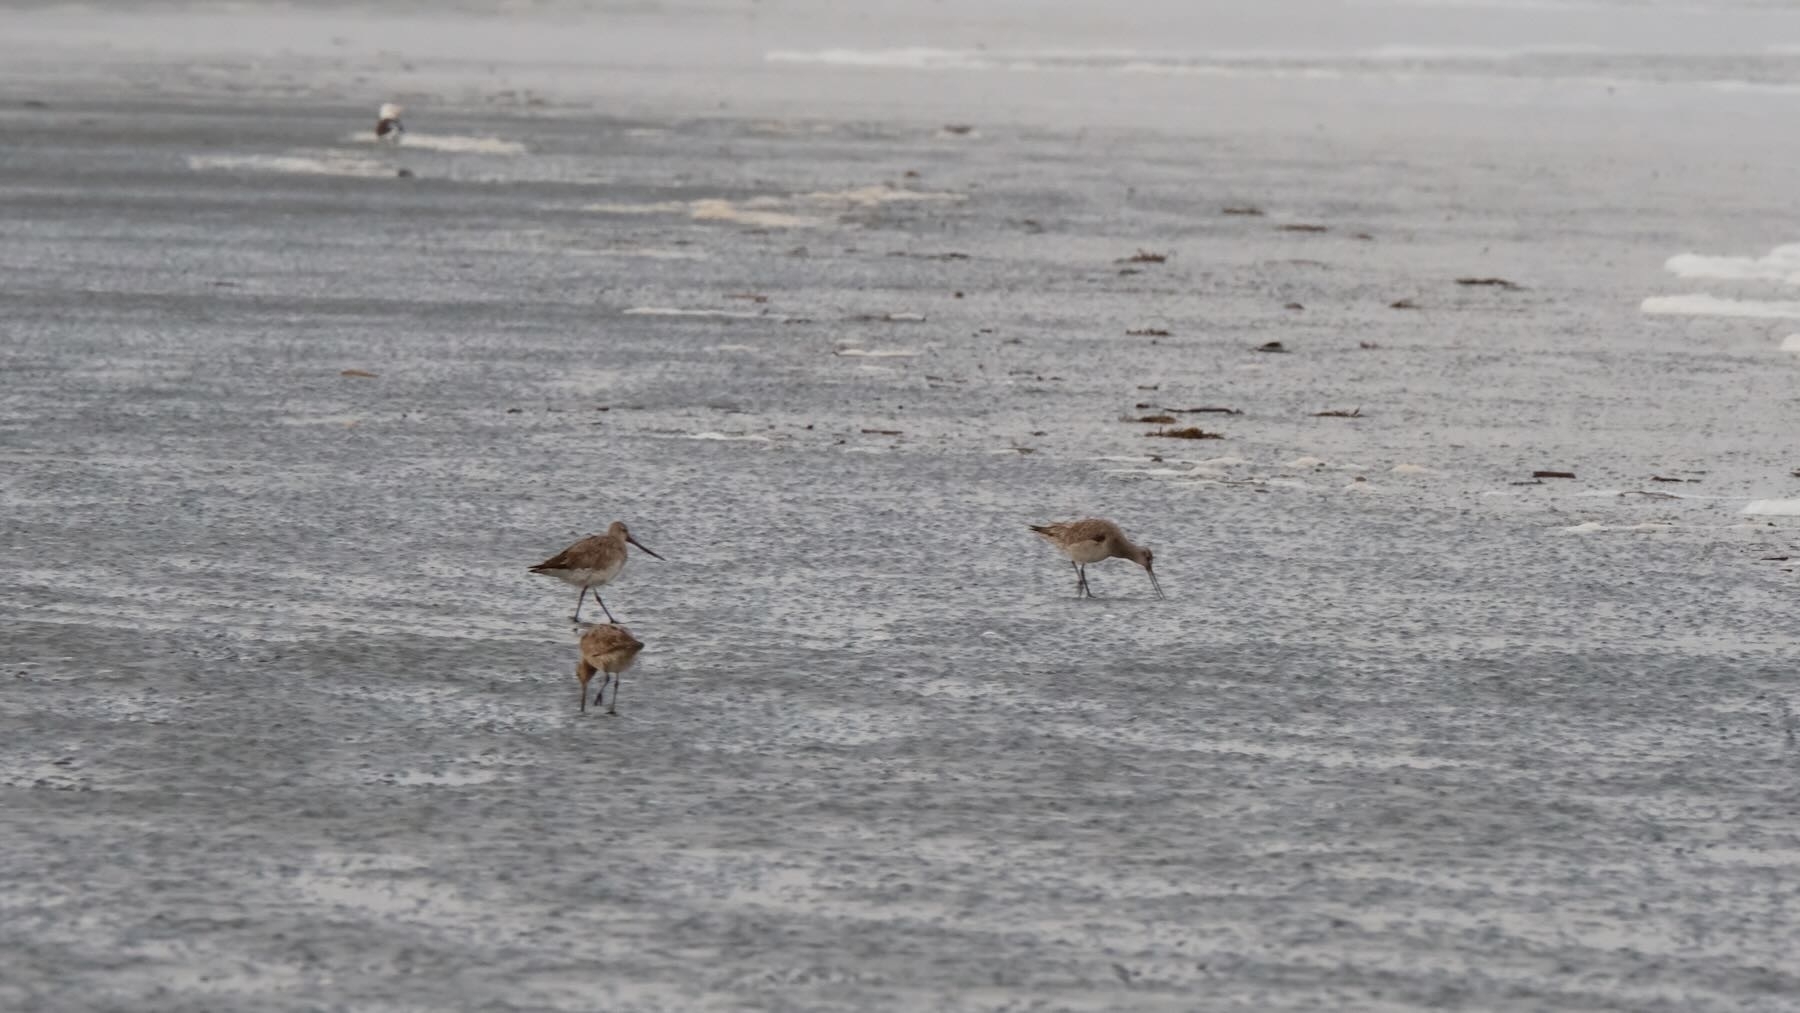 3 Godwits patrol the sand looking for food. 